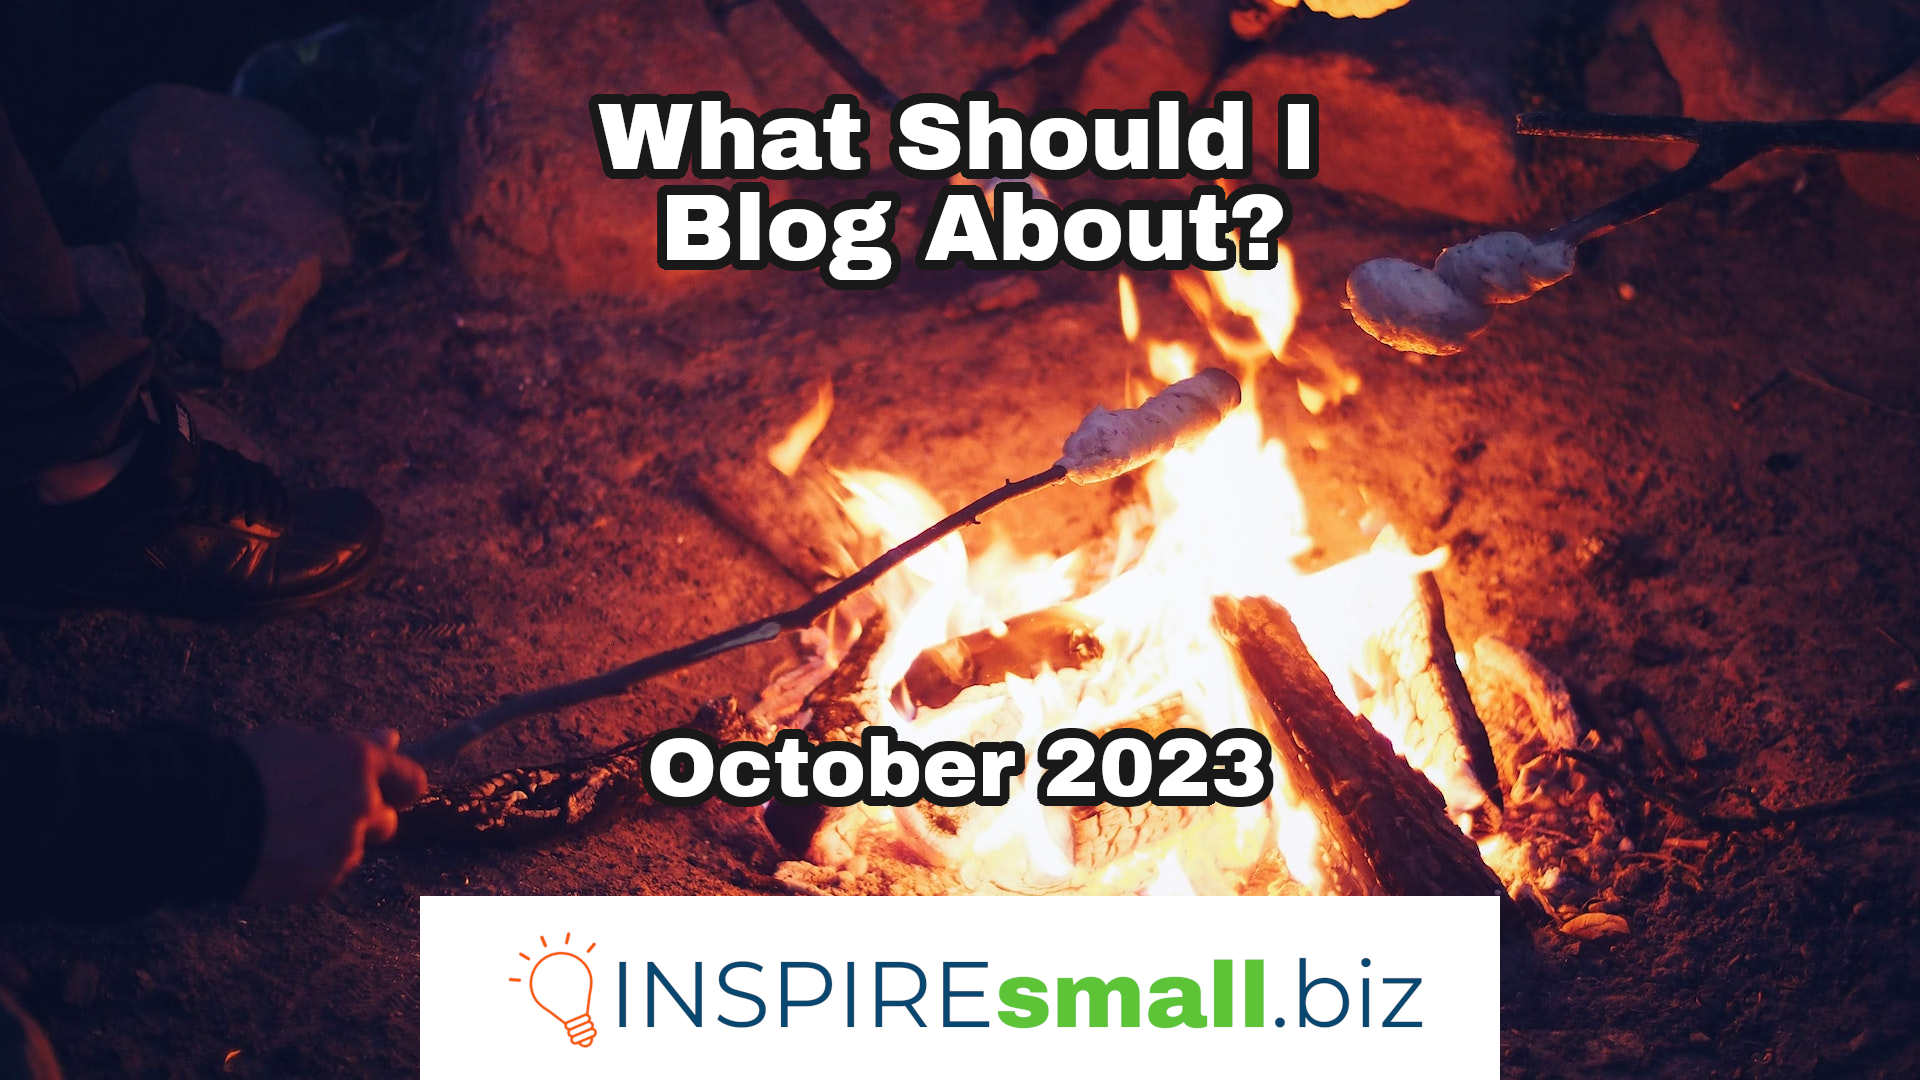 What should I blog about in October? From INSPIREsmall.biz